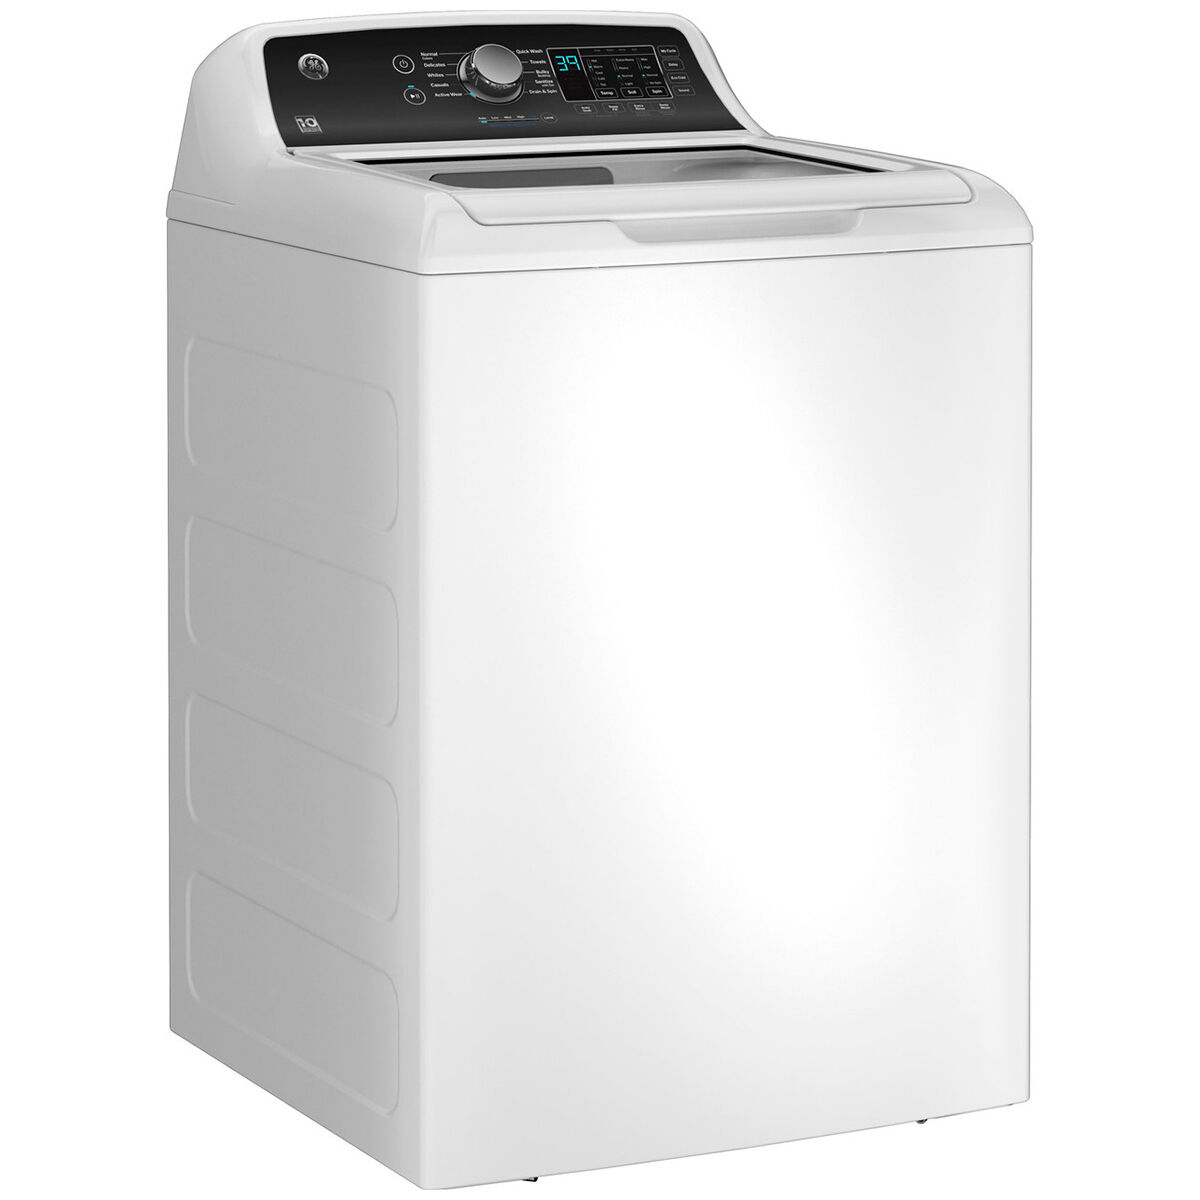 GE 27 in. 4.5 cu. ft. Top Load Washer with Agitator & Sanitize 